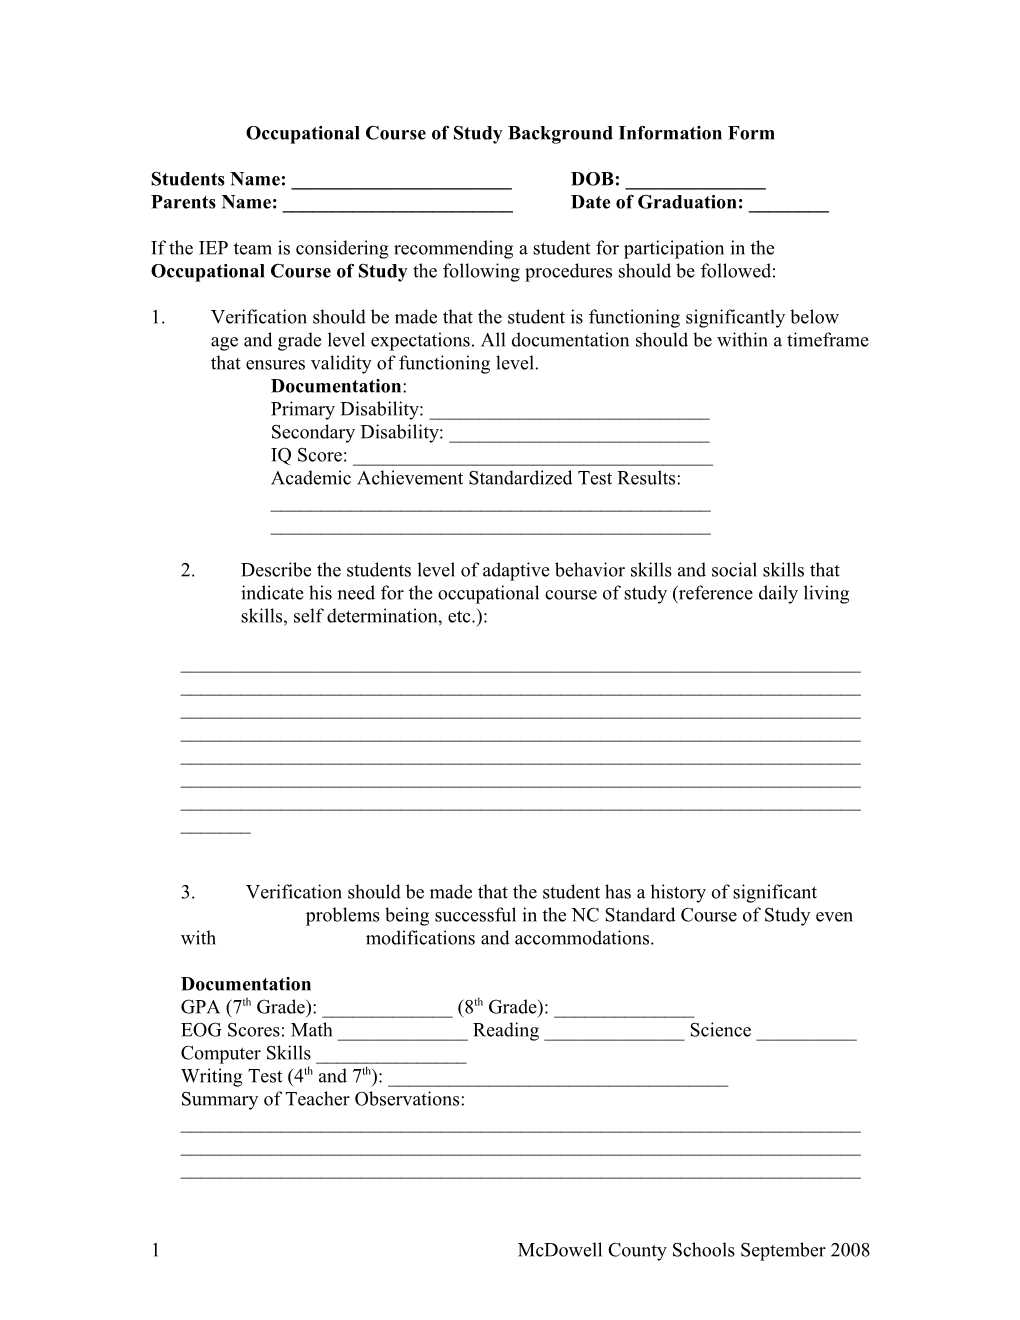 Occupational Course of Study Recommendation Form